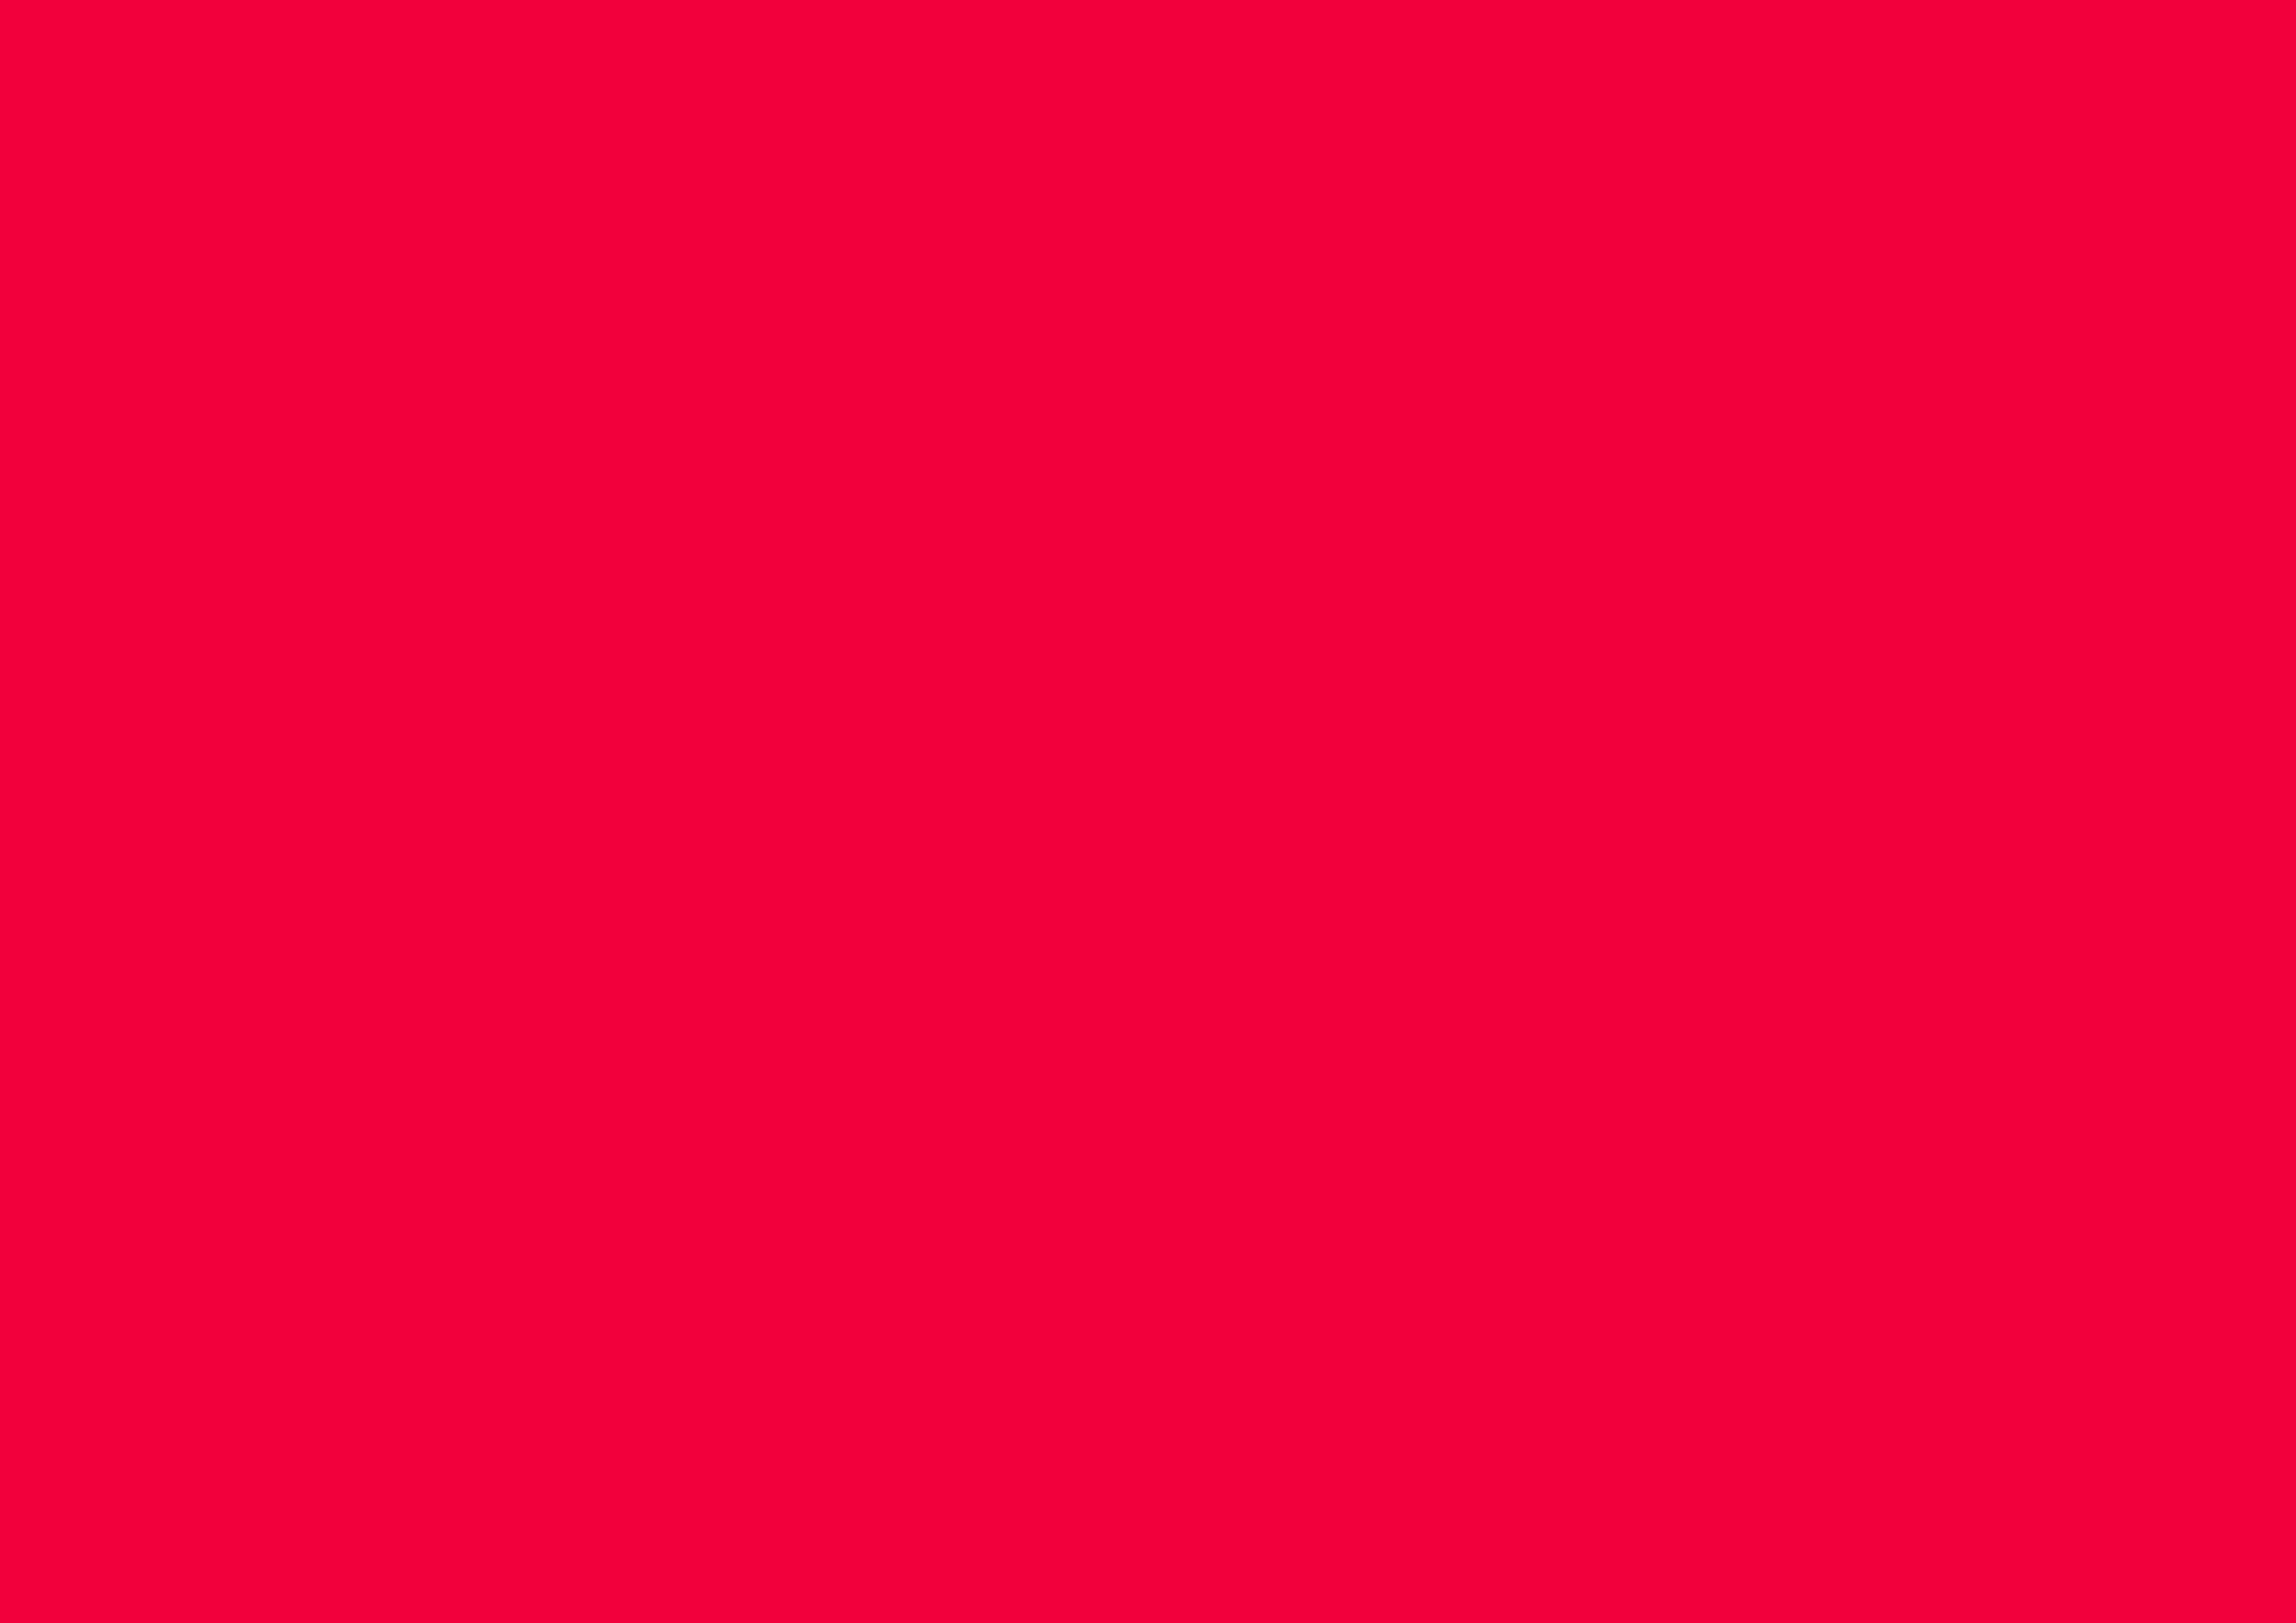 3508x2480 Red Munsell Solid Color Background